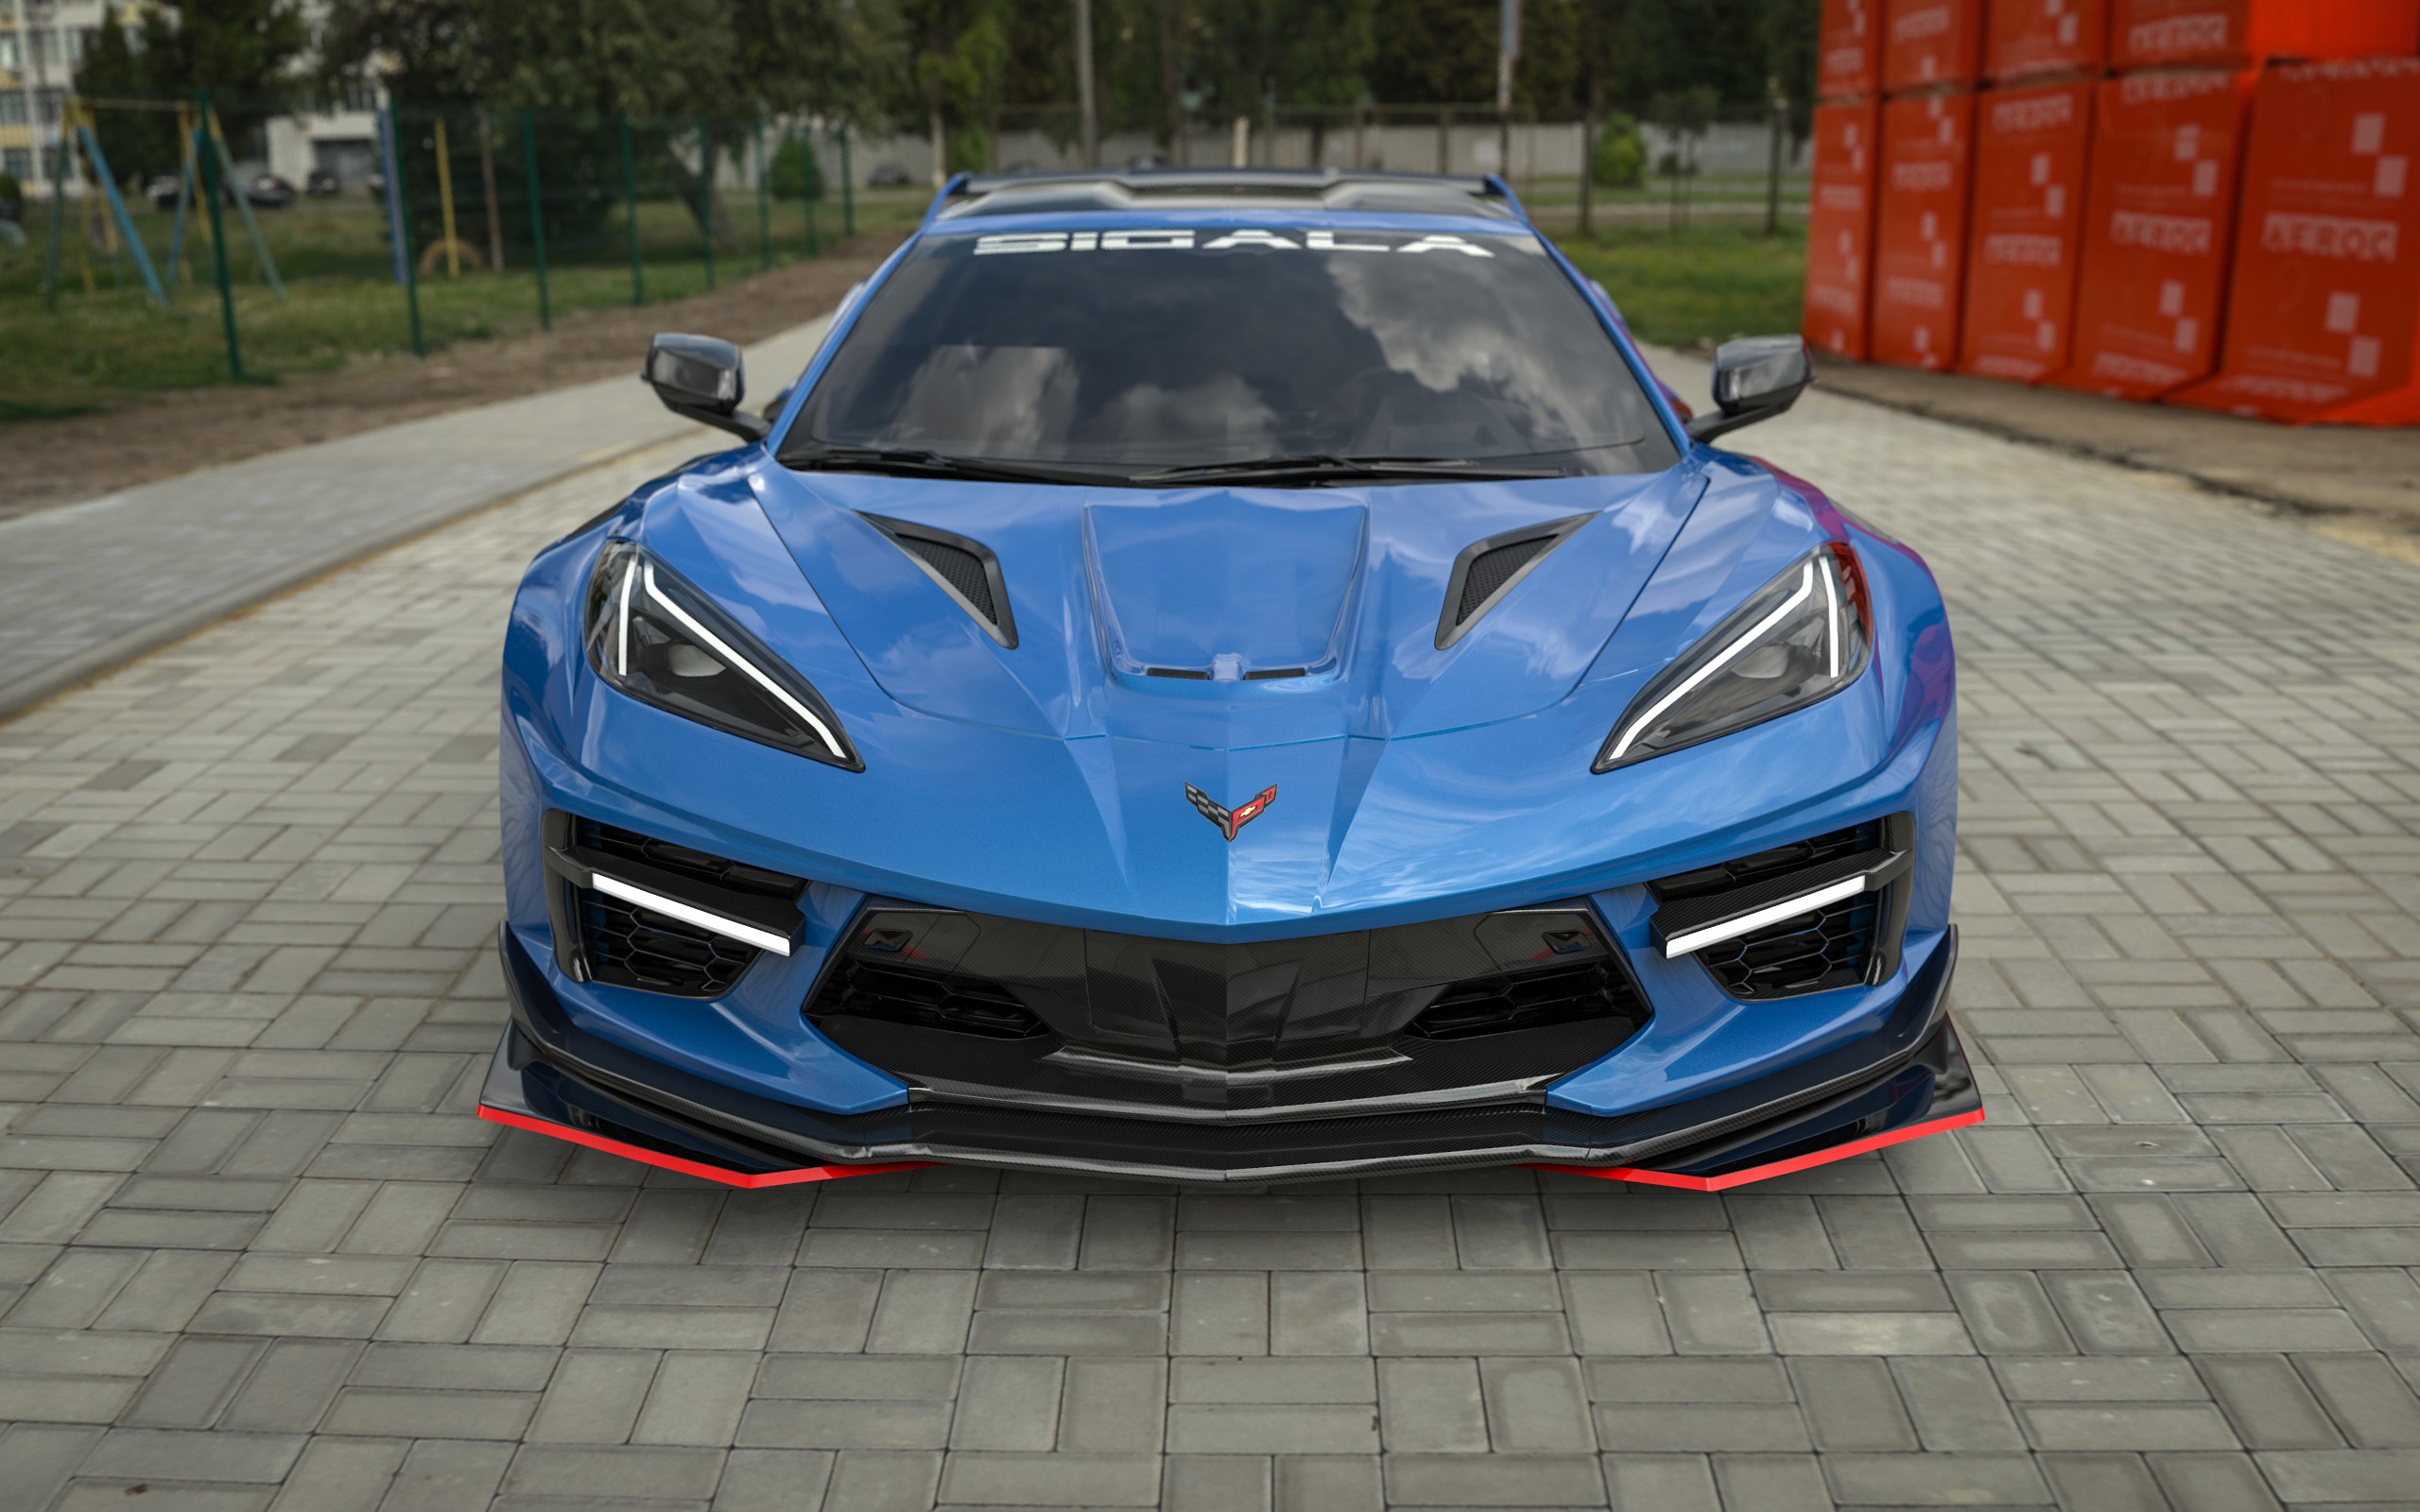 Widebody C8 Corvette â€œC8RRâ€  by Sigala Designs Looks Awesome, Coming